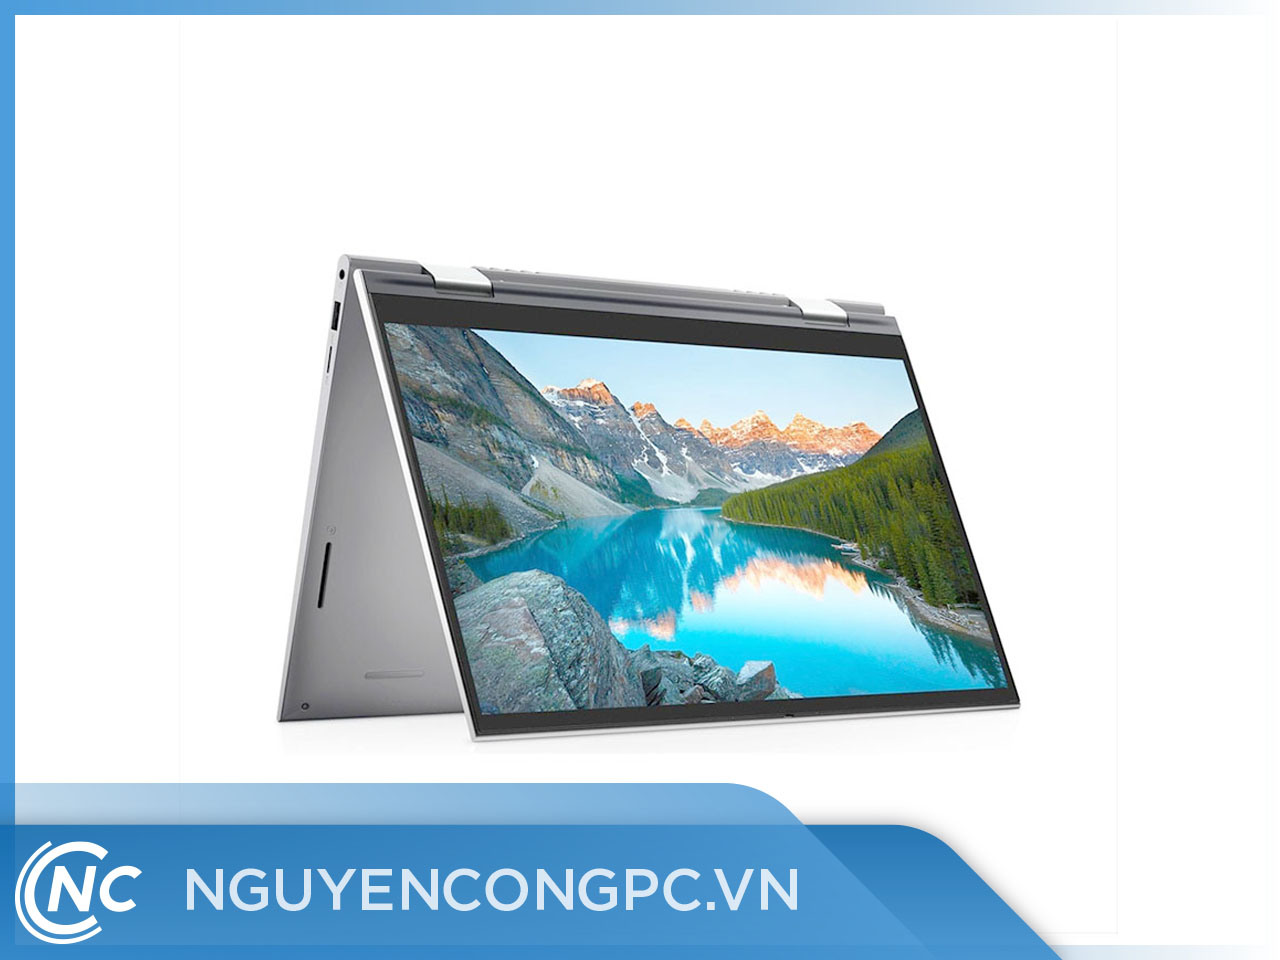 Laptop Dell Inspiron 5410 2in1 70270653 | Nguyễn Công PC